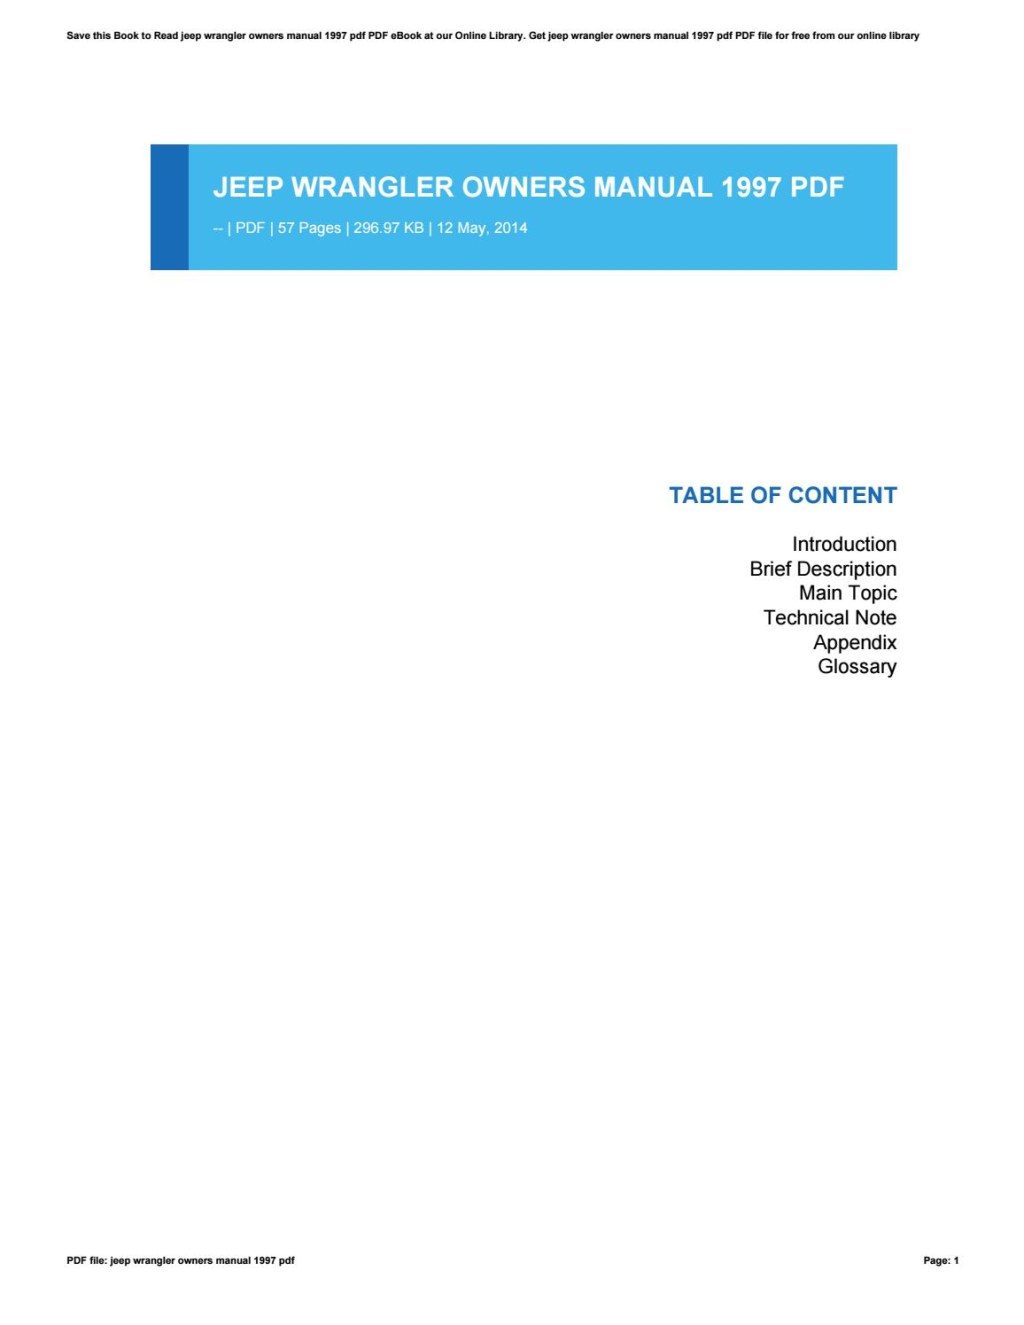 Picture of: Jeep wrangler owners manual  pdf by themail – Issuu